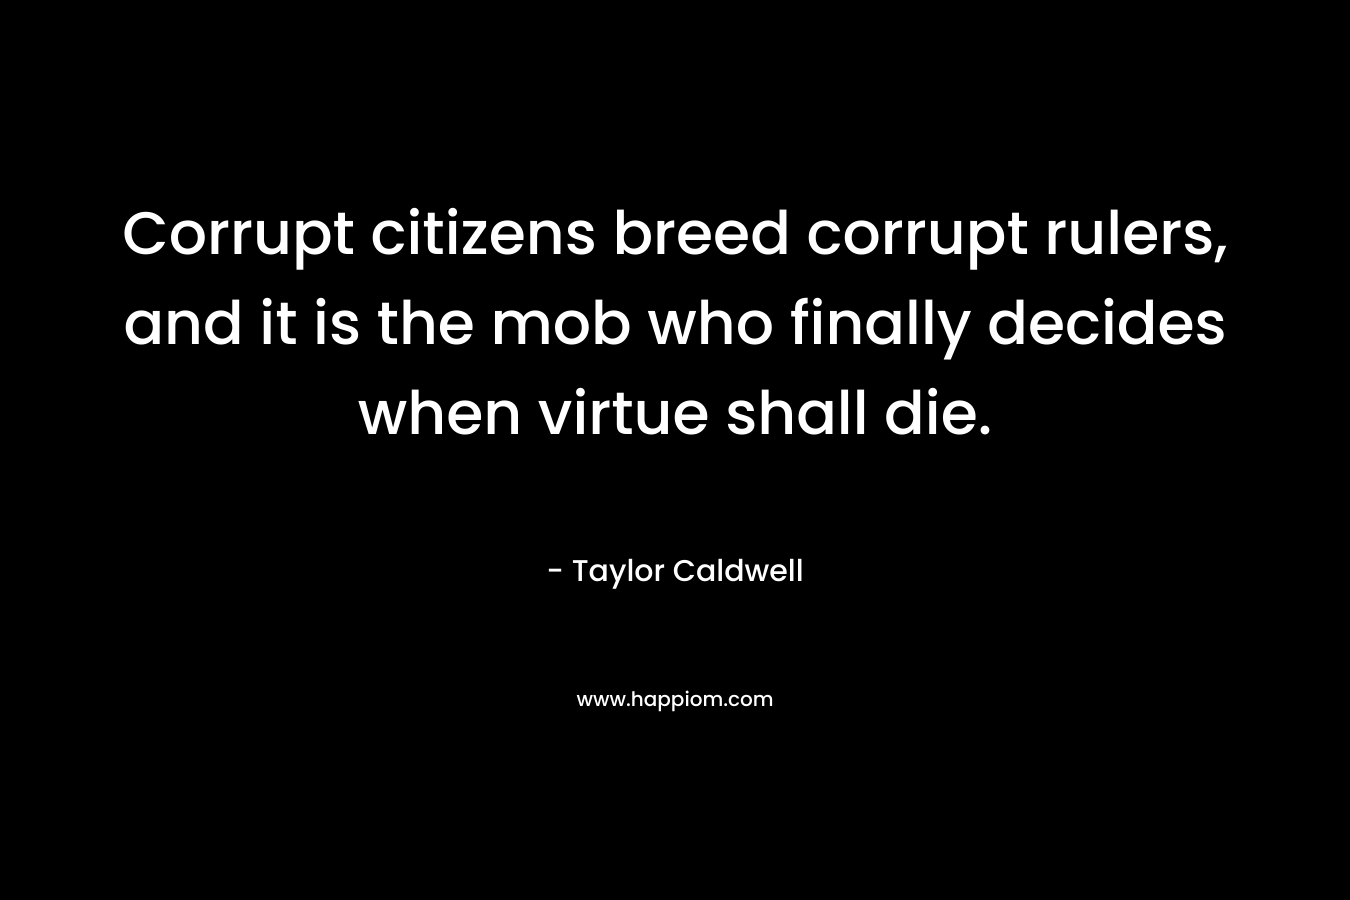 Corrupt citizens breed corrupt rulers, and it is the mob who finally decides when virtue shall die.